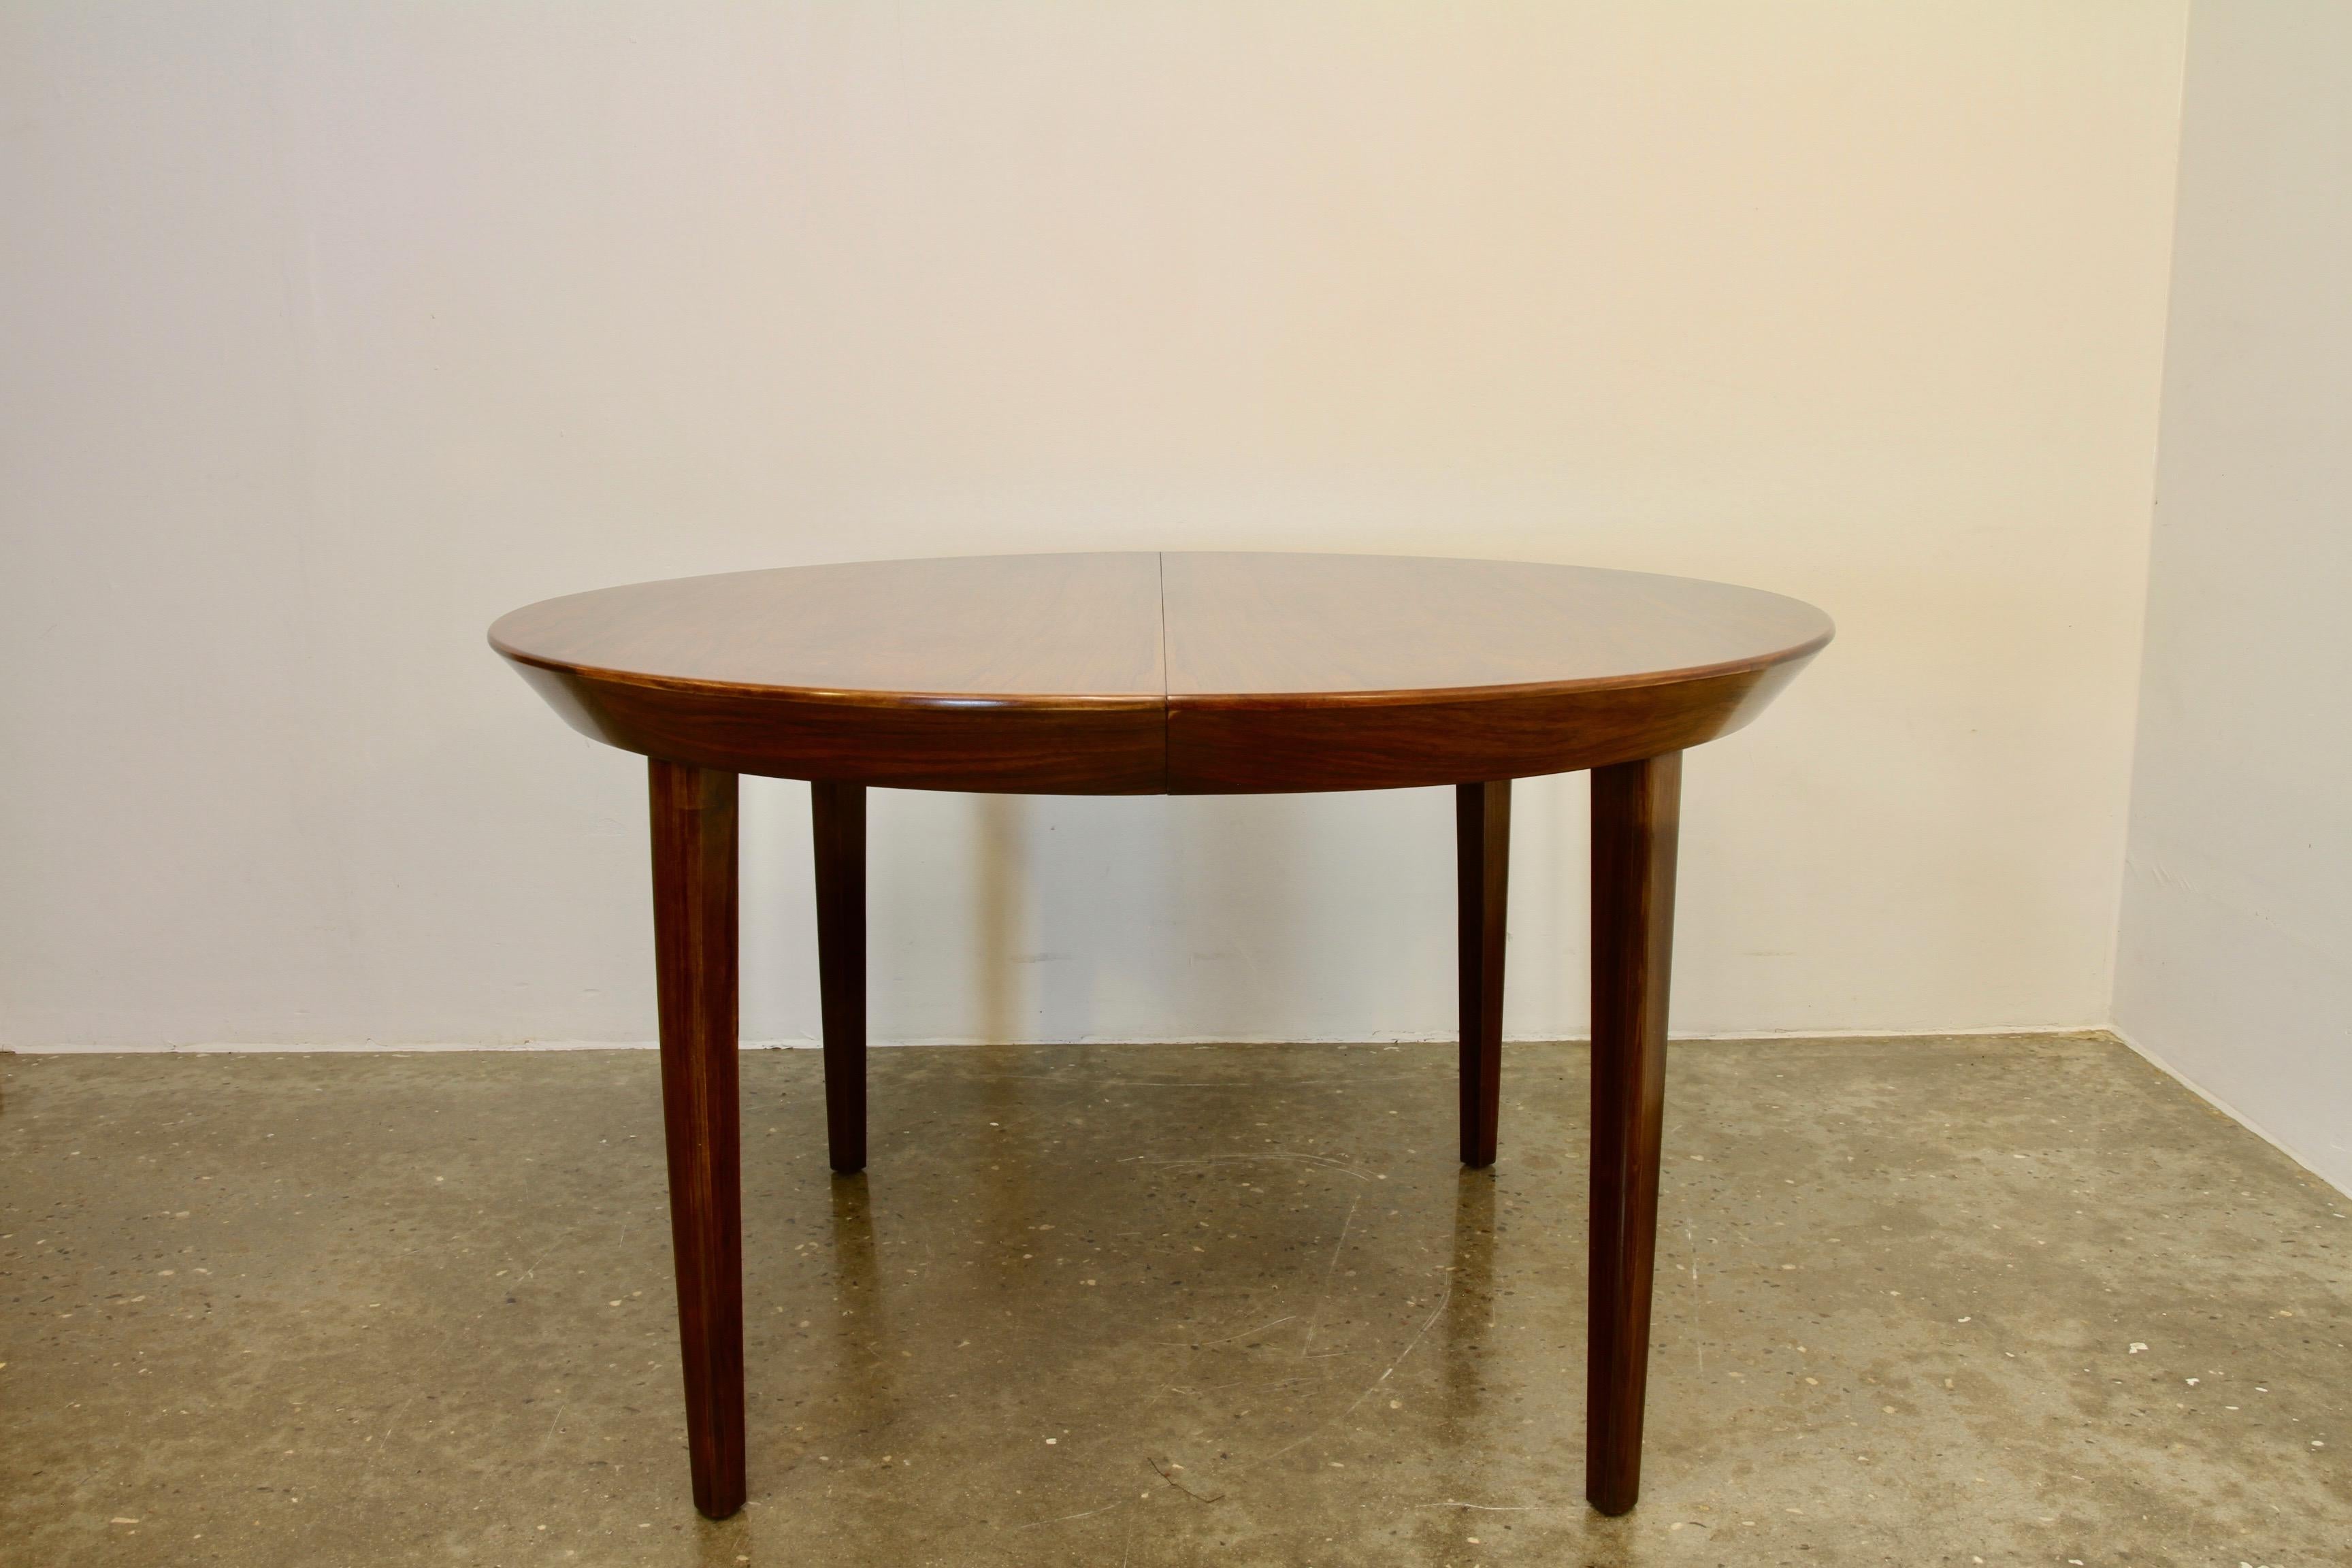 Immensely beautiful and elegant Danish Mid-Century Modern extendable round dining table. Very stylish large slanting edge and tapered legs. Amazing mirrored veneer vintage pattern. Comes with two extension leaves each 49.5 cms, which increases the